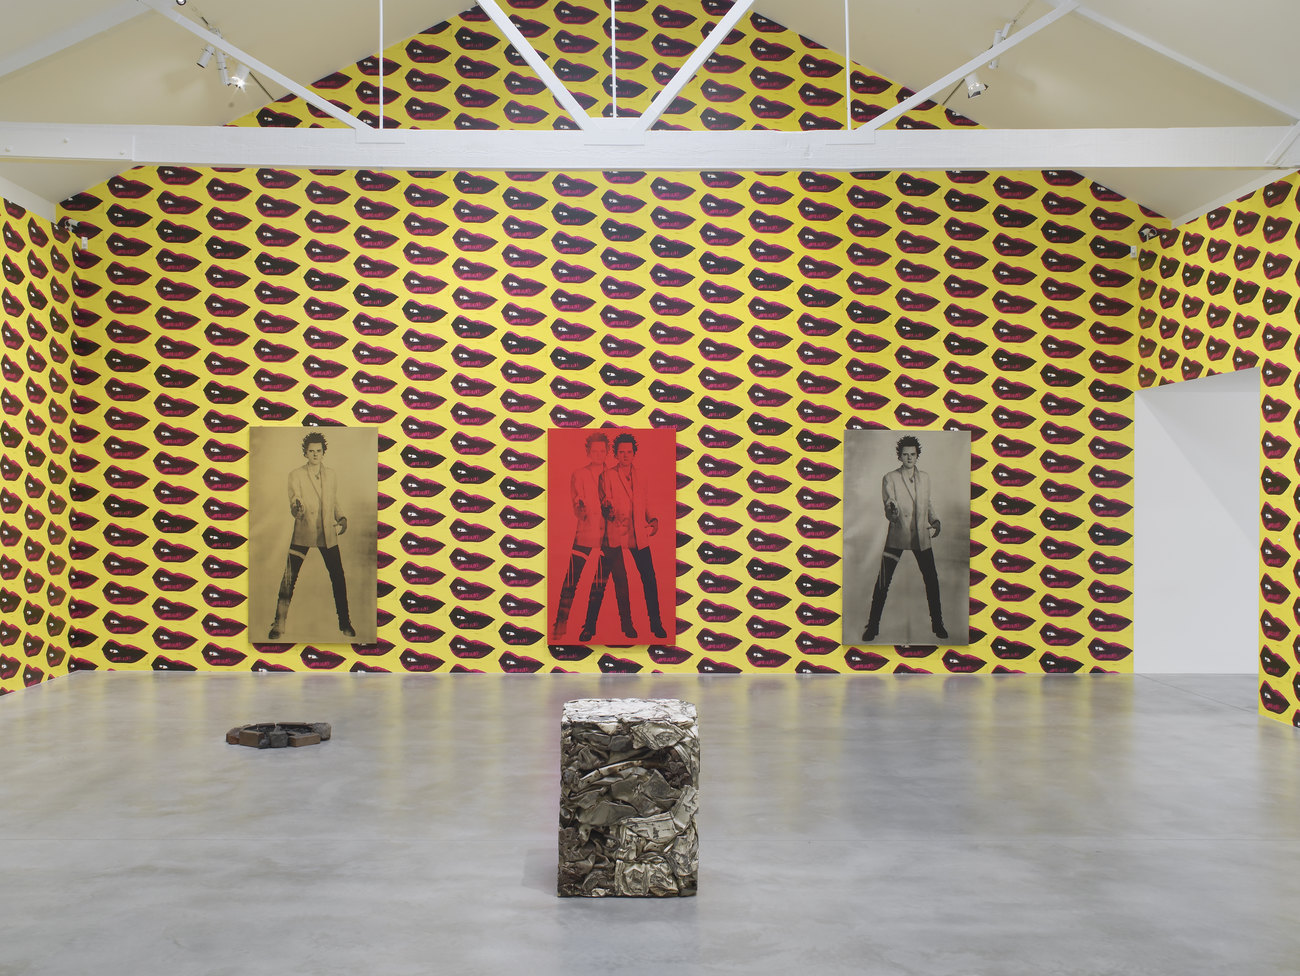 A compacted metal cuboid sits in the centre of a room, behind it hang three prints of a man (Gavin Turk) as Sid Vicious, adopting an iconic Elvis pose. The walls are yellow with red pattern